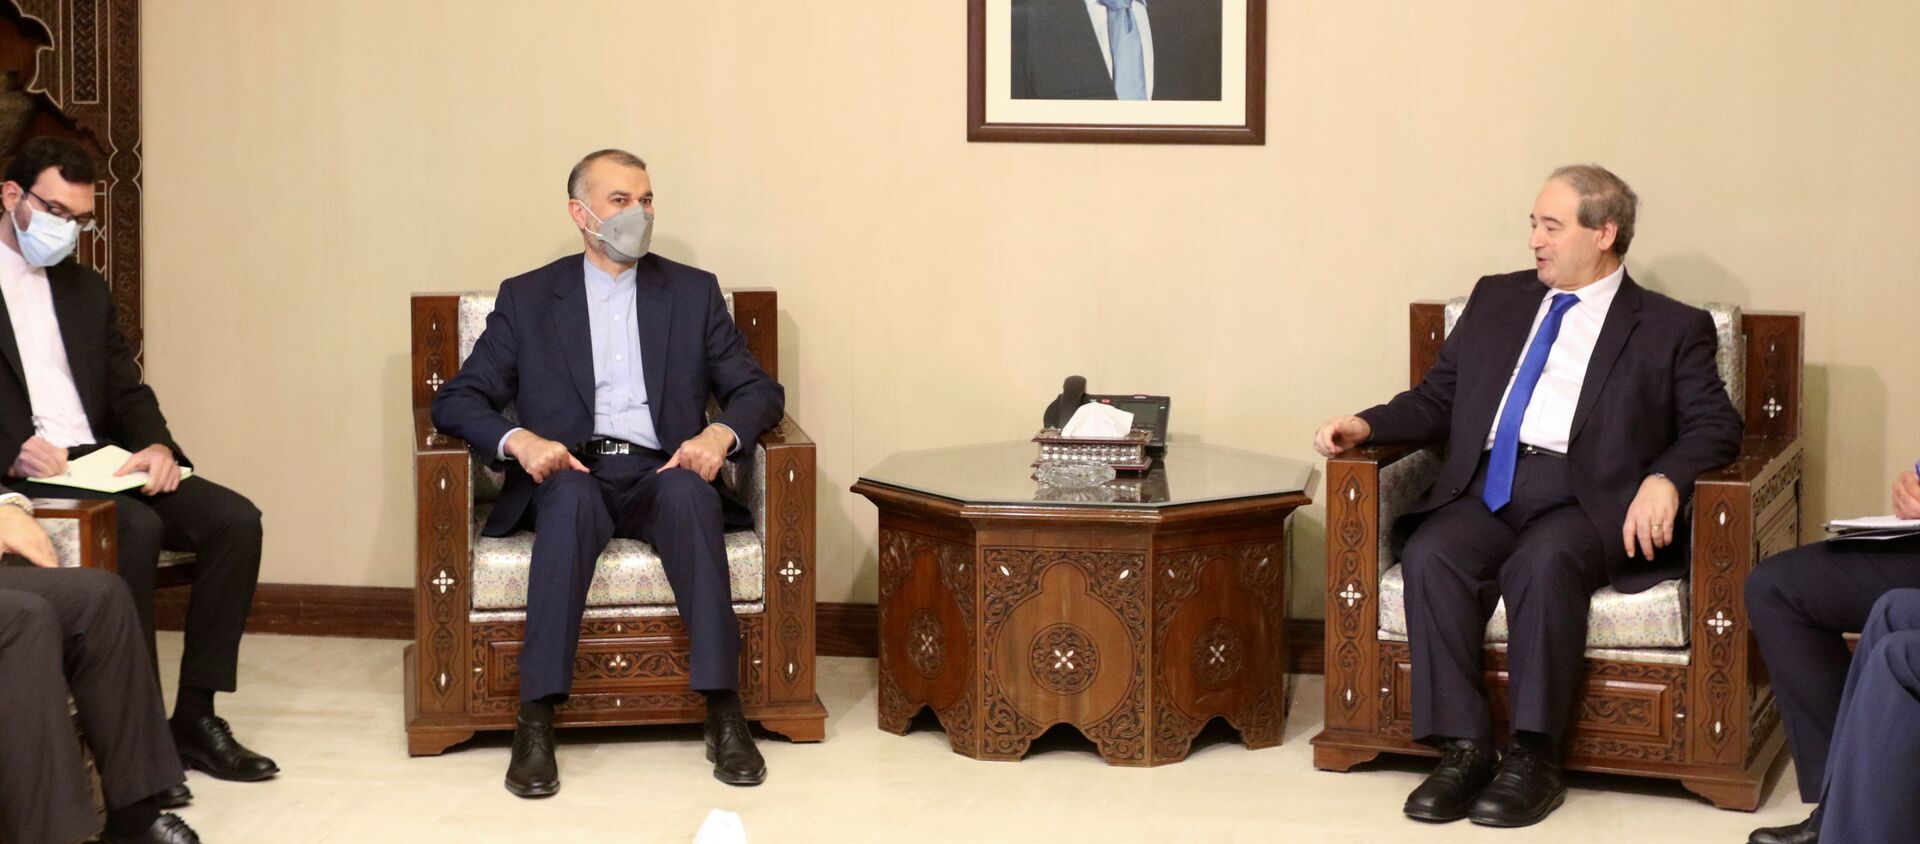 Iran's Foreign Minister, Hossein Amir Abdollahian, and Syrian Foreign Minister Faisal al Mekdad, meet at the Foreign Ministry in Damascus, Syria August 29, 2021 - Sputnik International, 1920, 29.08.2021